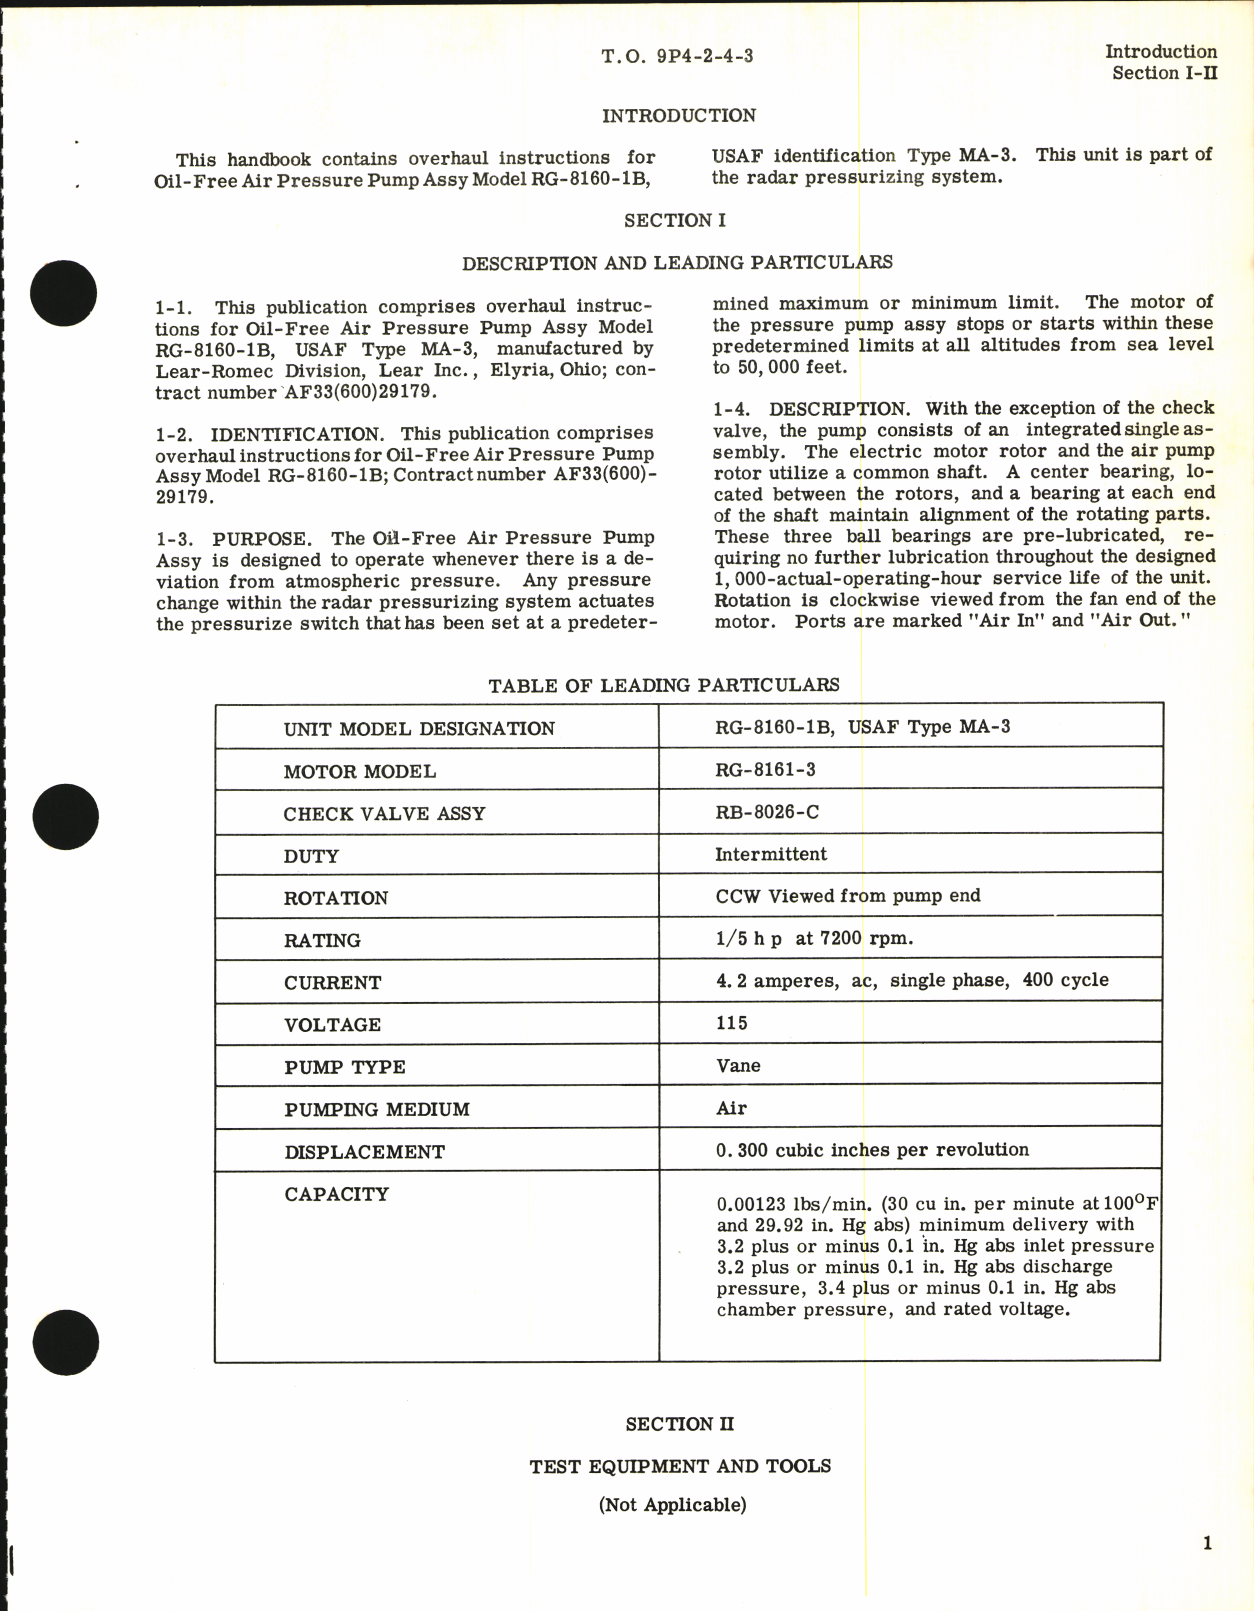 Sample page 5 from AirCorps Library document: Handbook of Overhaul Instructions for Oil-Free Air Pressure Pump Model RG-8160-1B